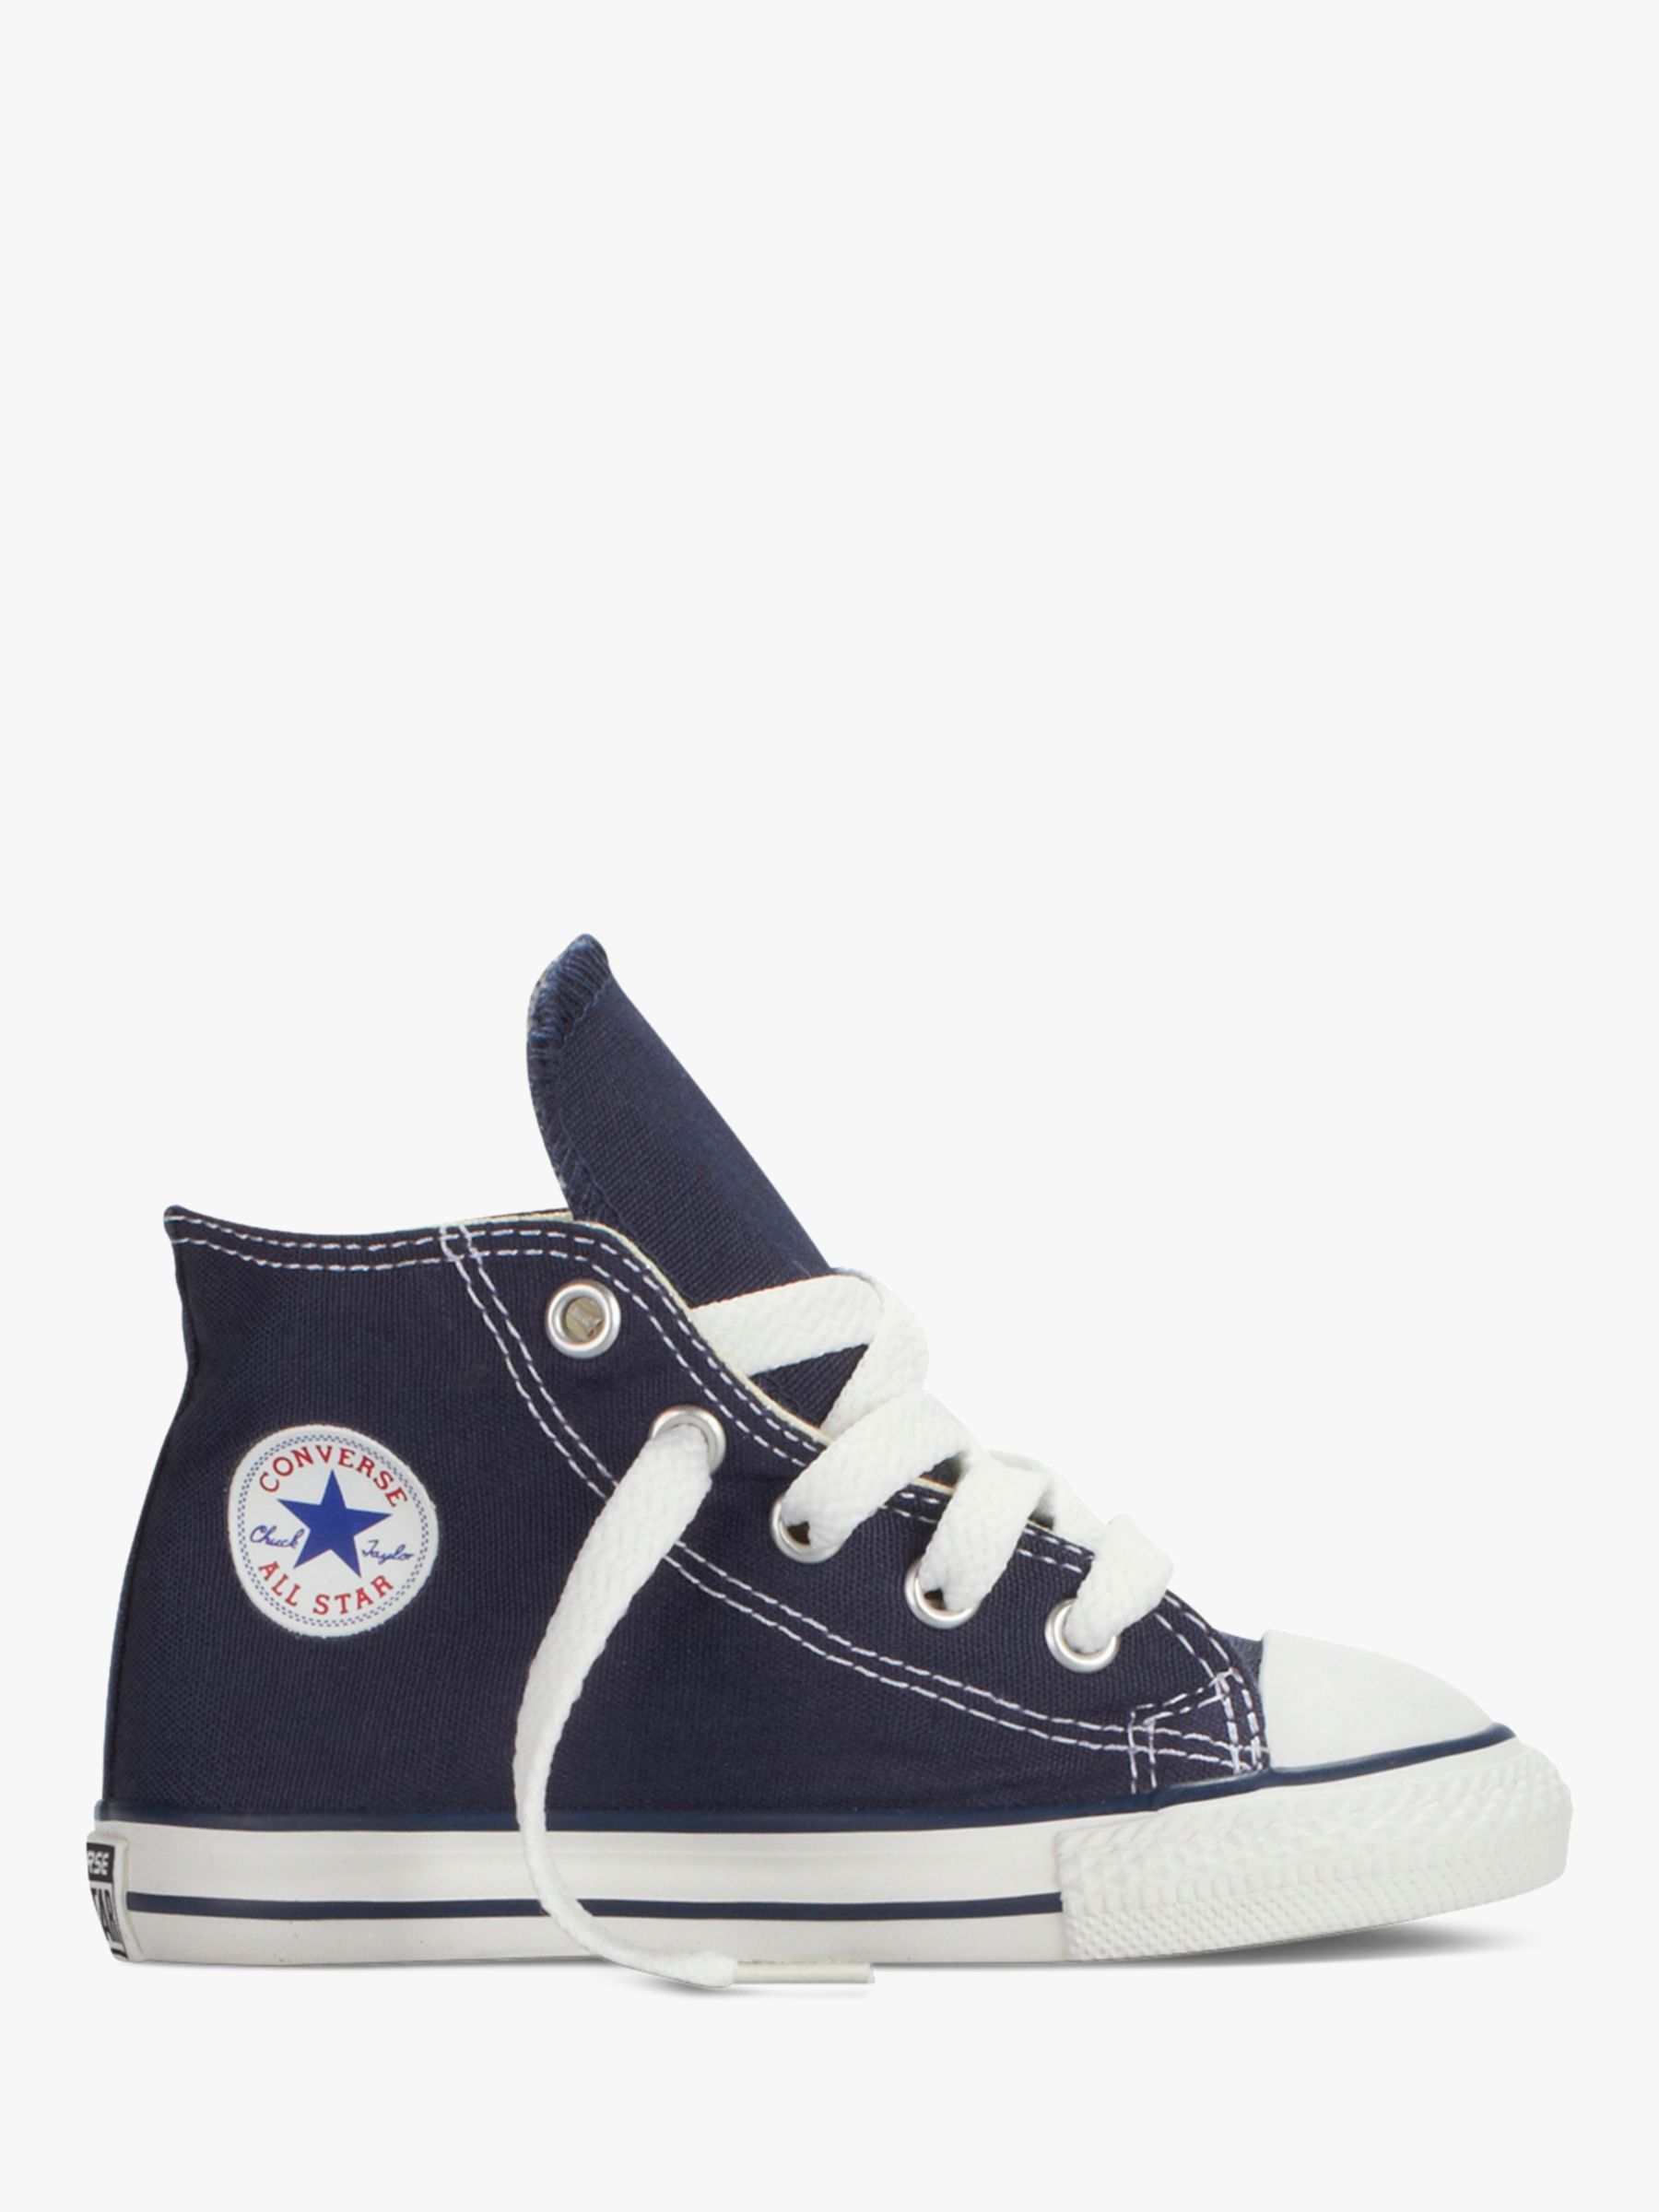 Converse All Star Core-Hi Trainers, Navy, Size 3 Adult